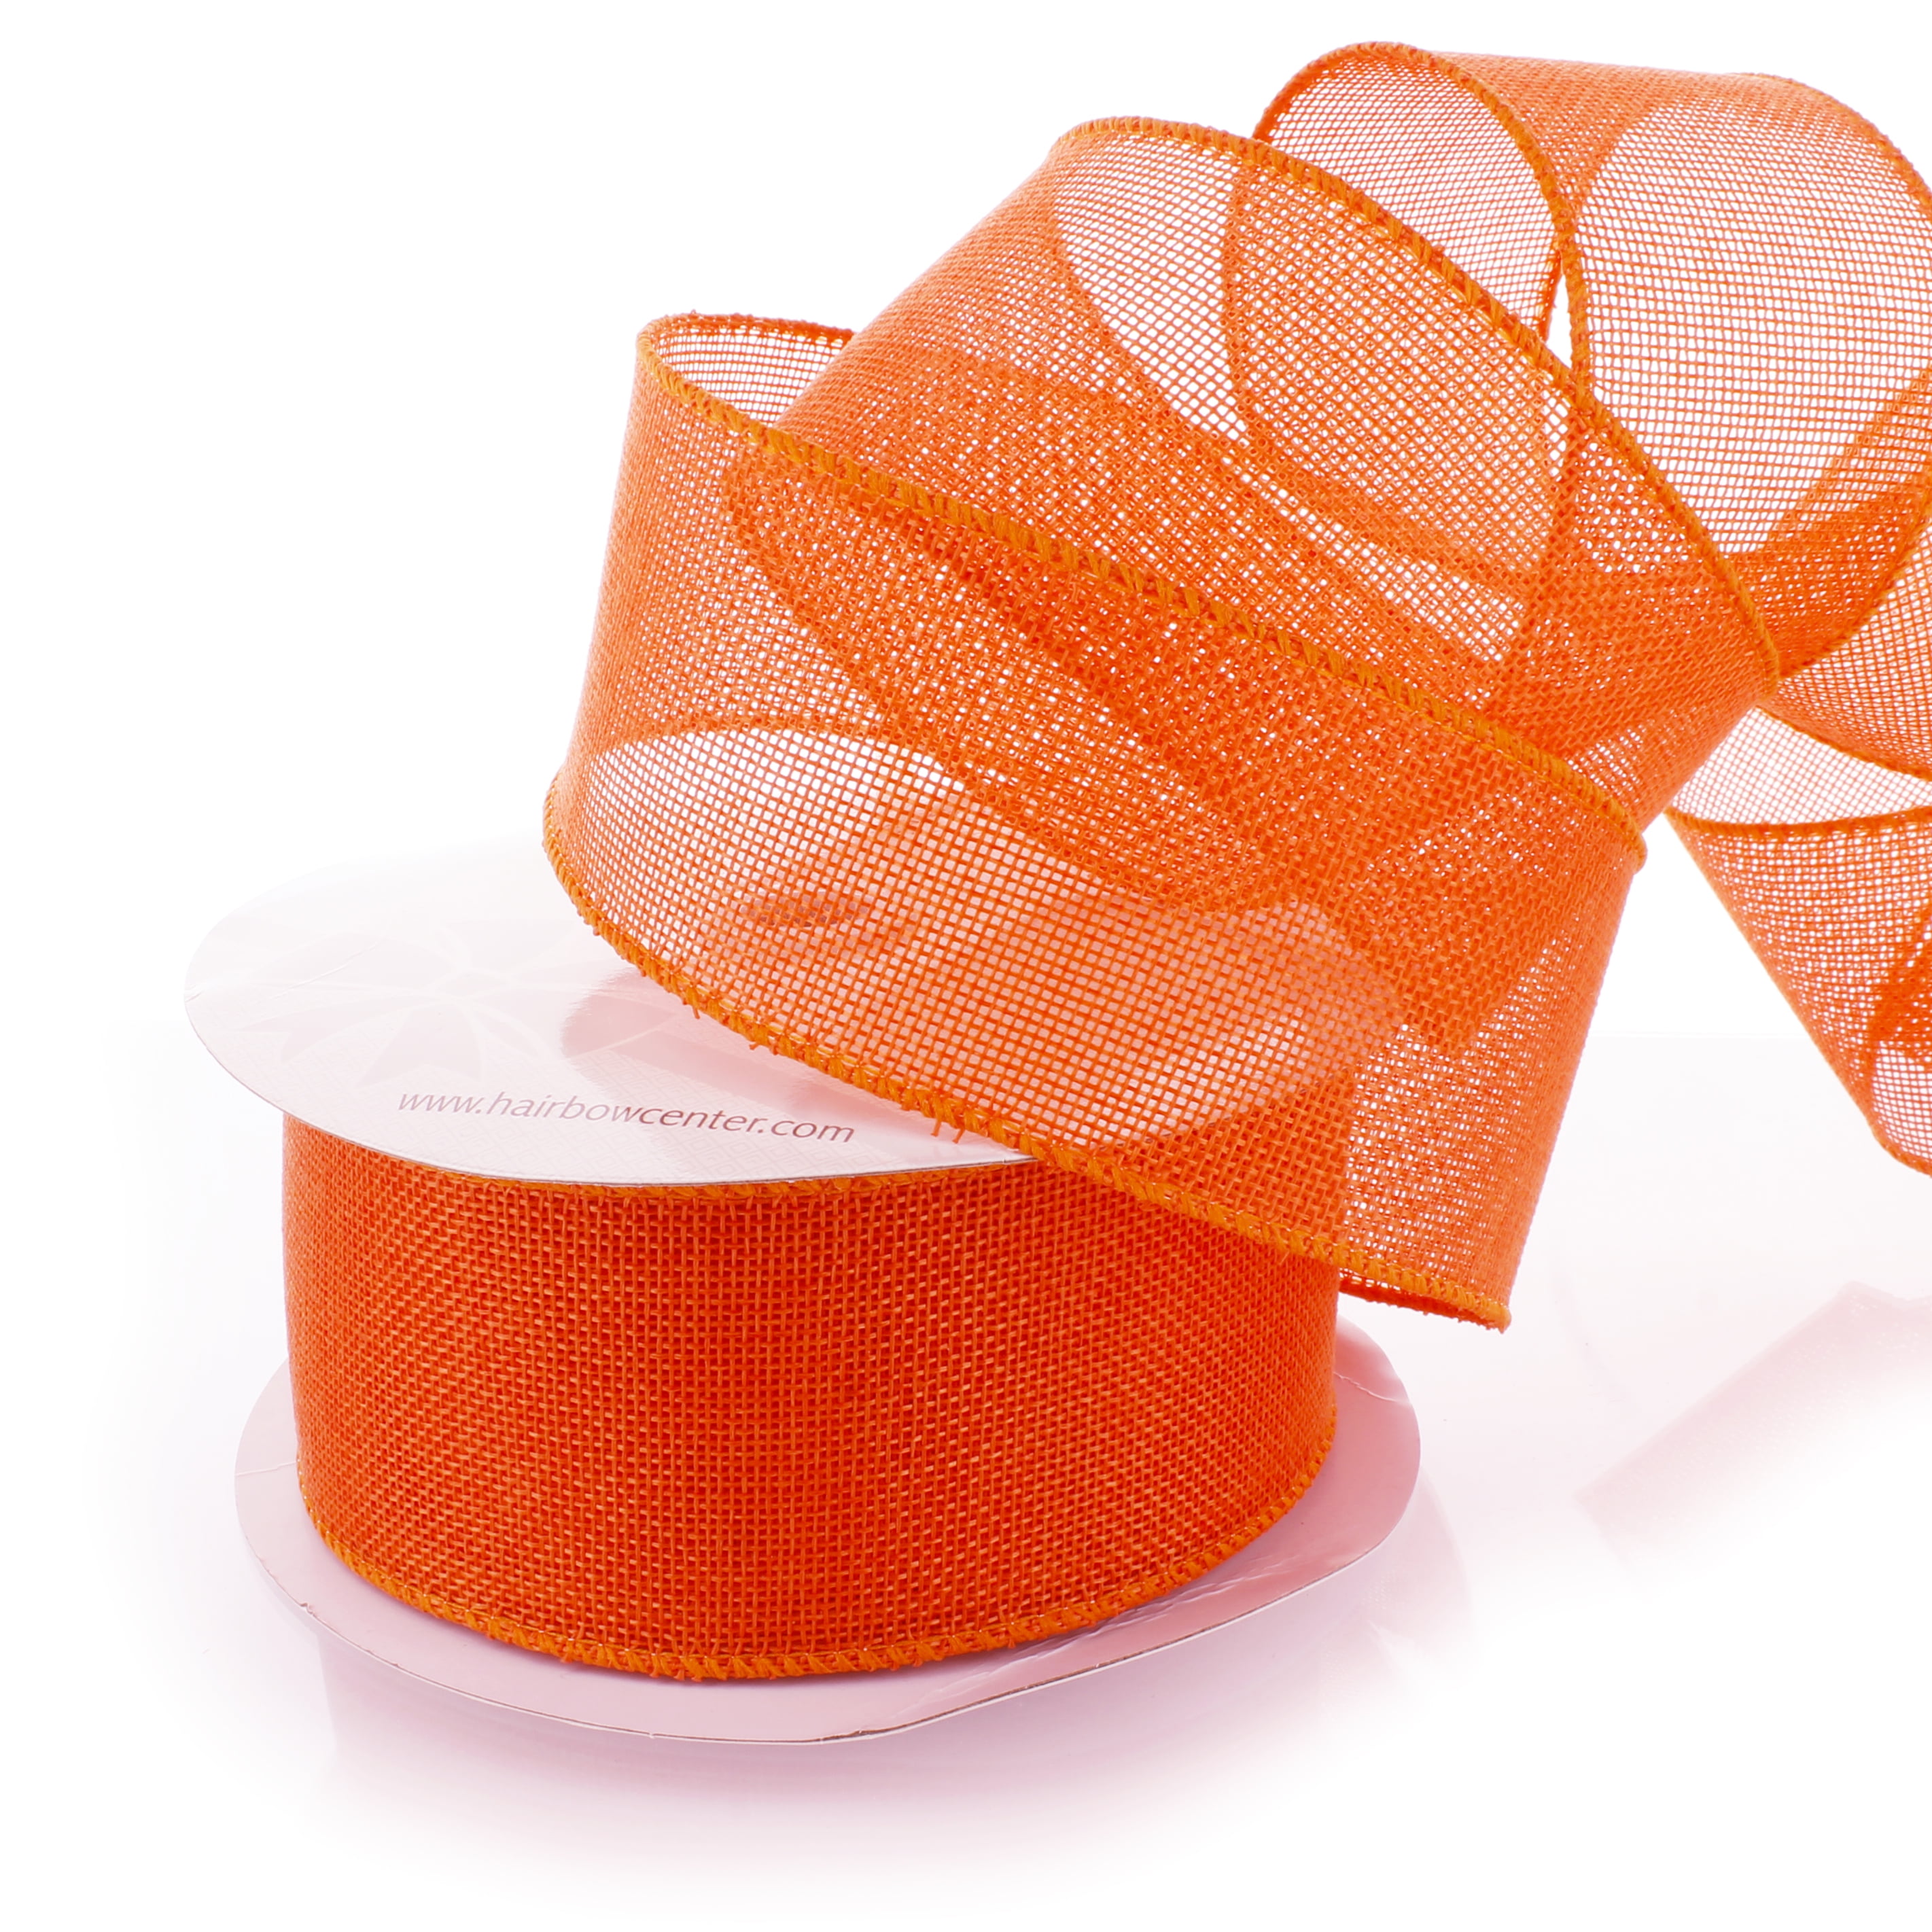 Ribbon Traditions Narrow Farmhouse Stripes Burlap Wired Ribbon 2 1/2 By 10  Yards - Orange / Off-White